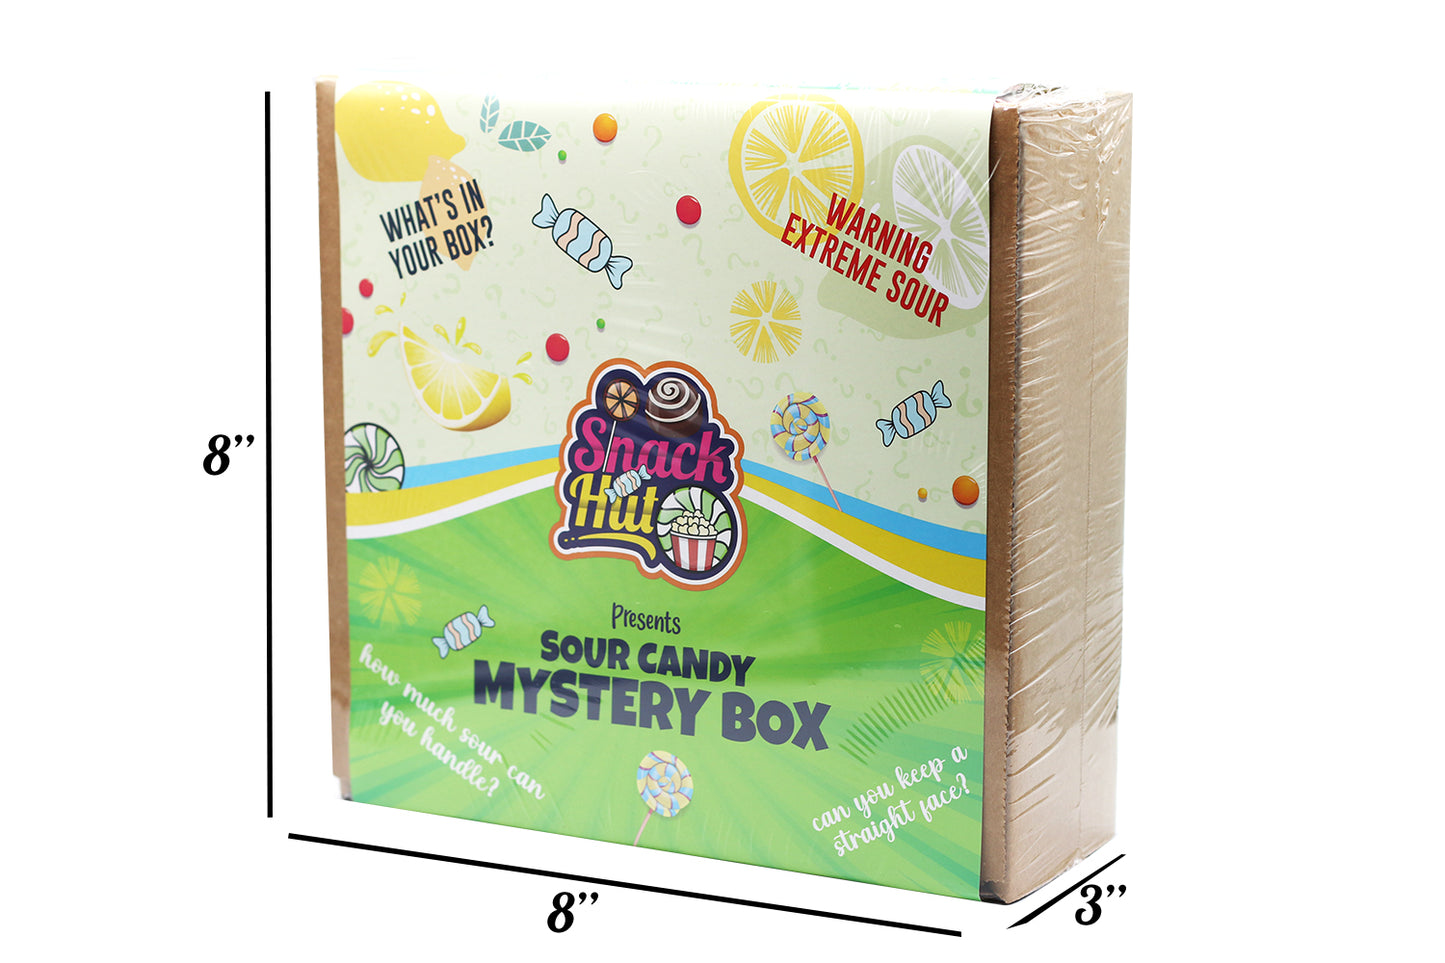 whats in a mystery box from ｜TikTok Search